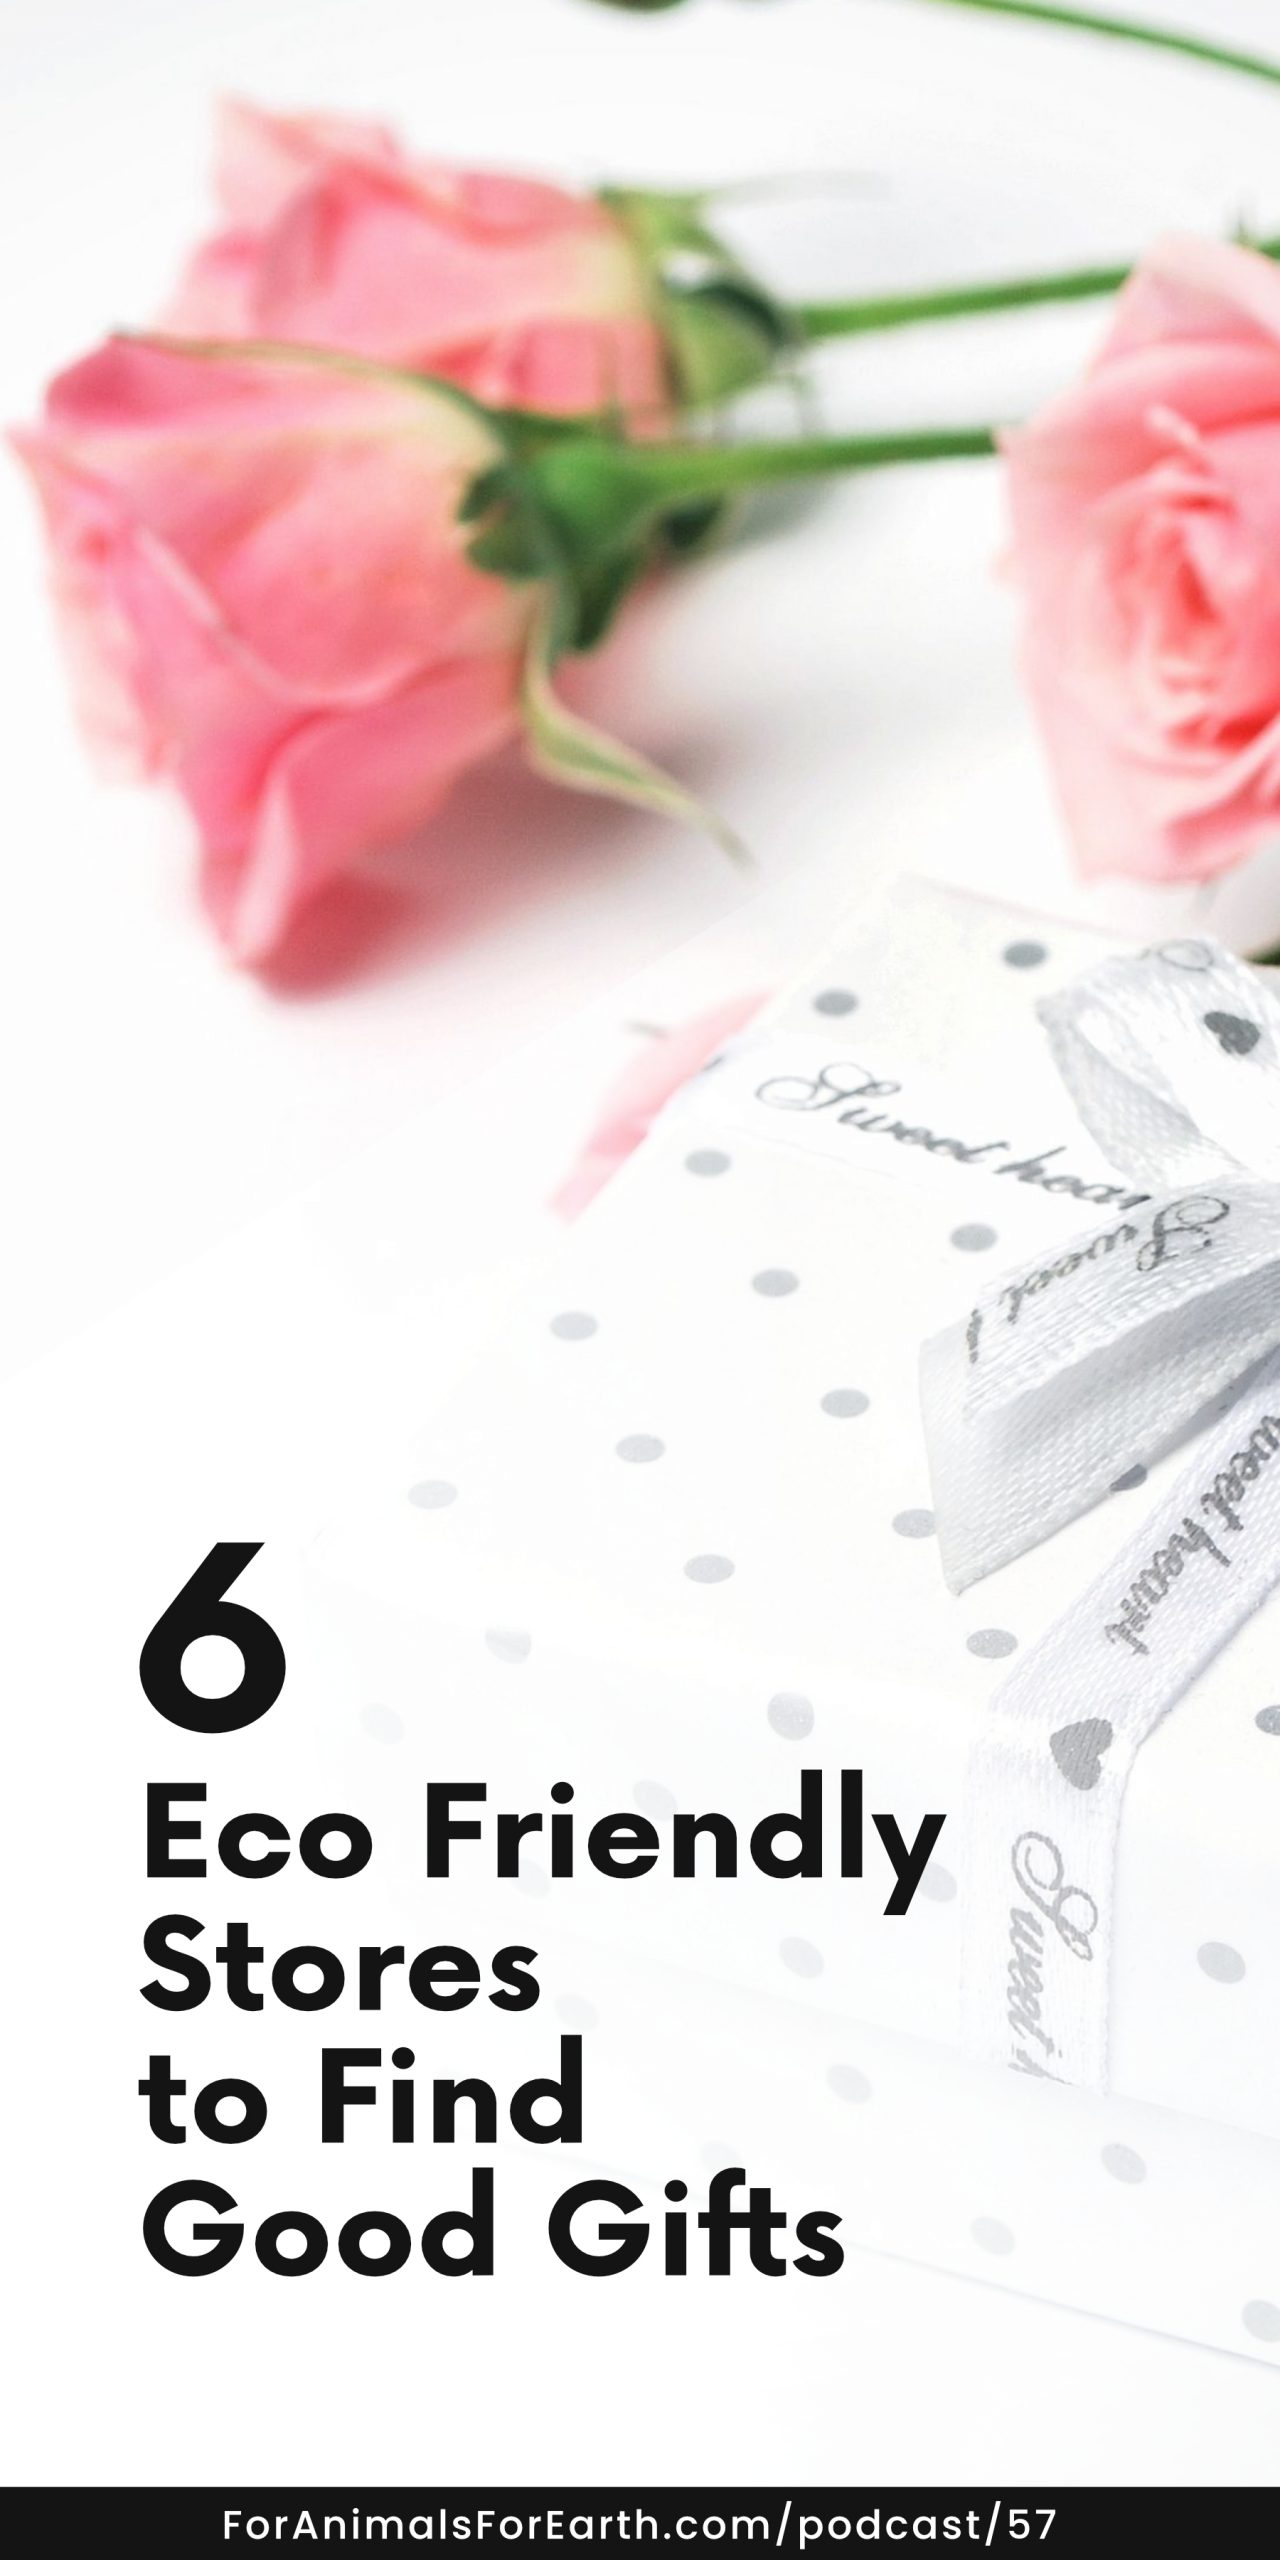 Eco friendly stores to find good gifts for the conscious shopper, on the For Animals. For Earth. podcast